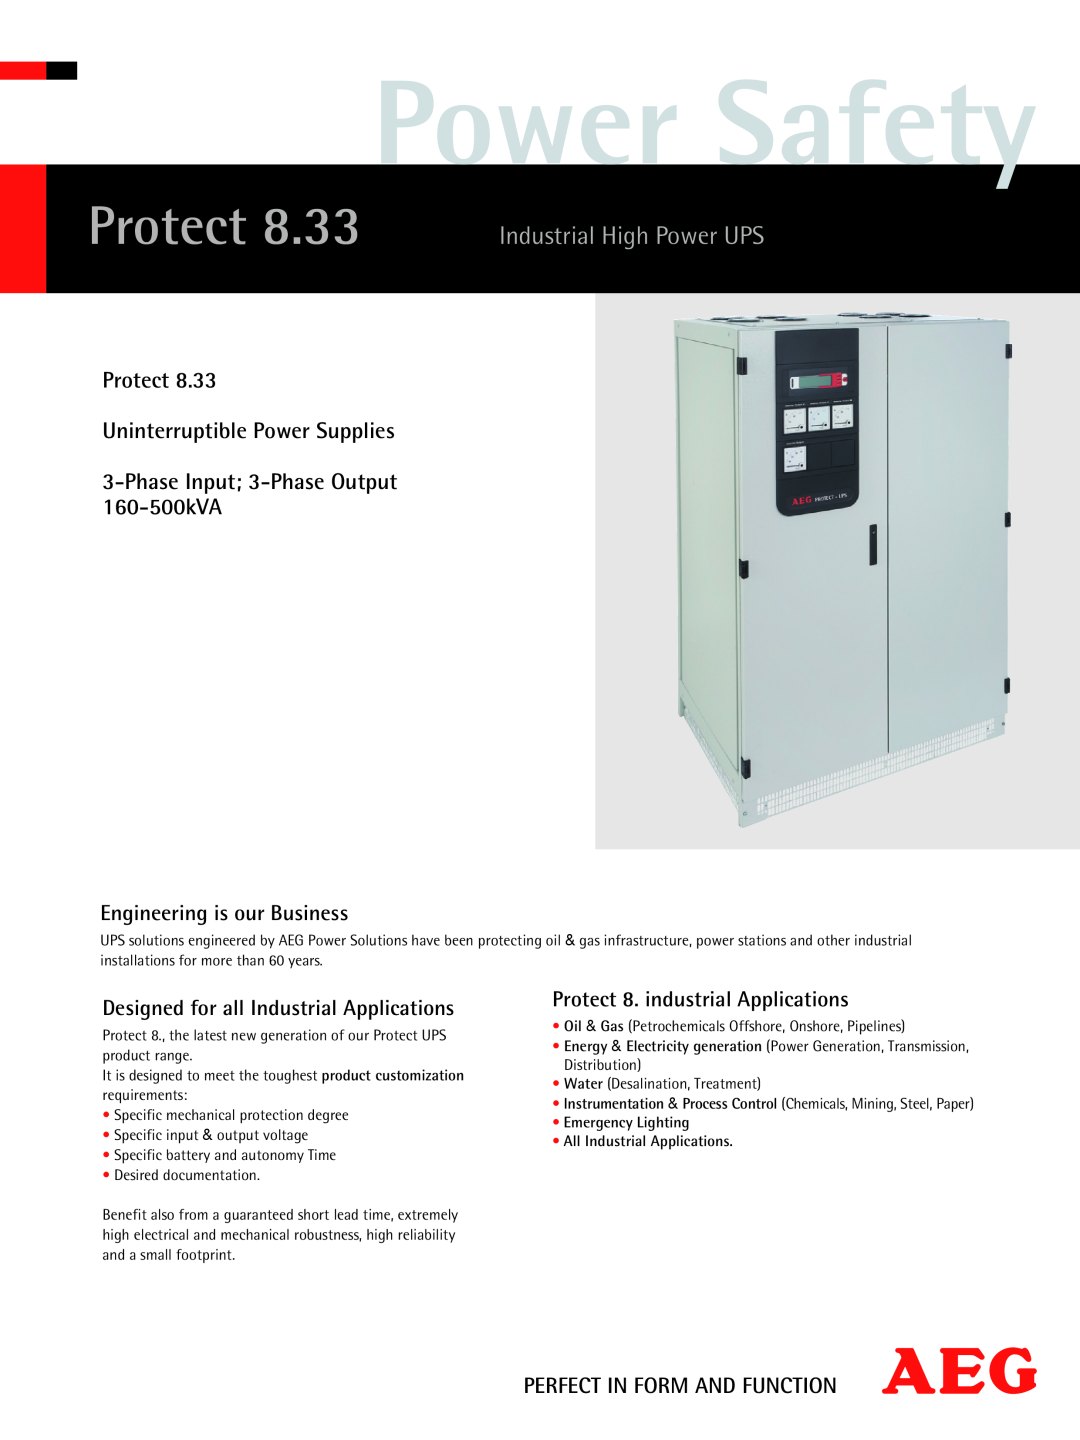 AEG 160-500kVA manual Industrial High Power UPS, Engineering is our Business, Protect 8. industrial Applications 